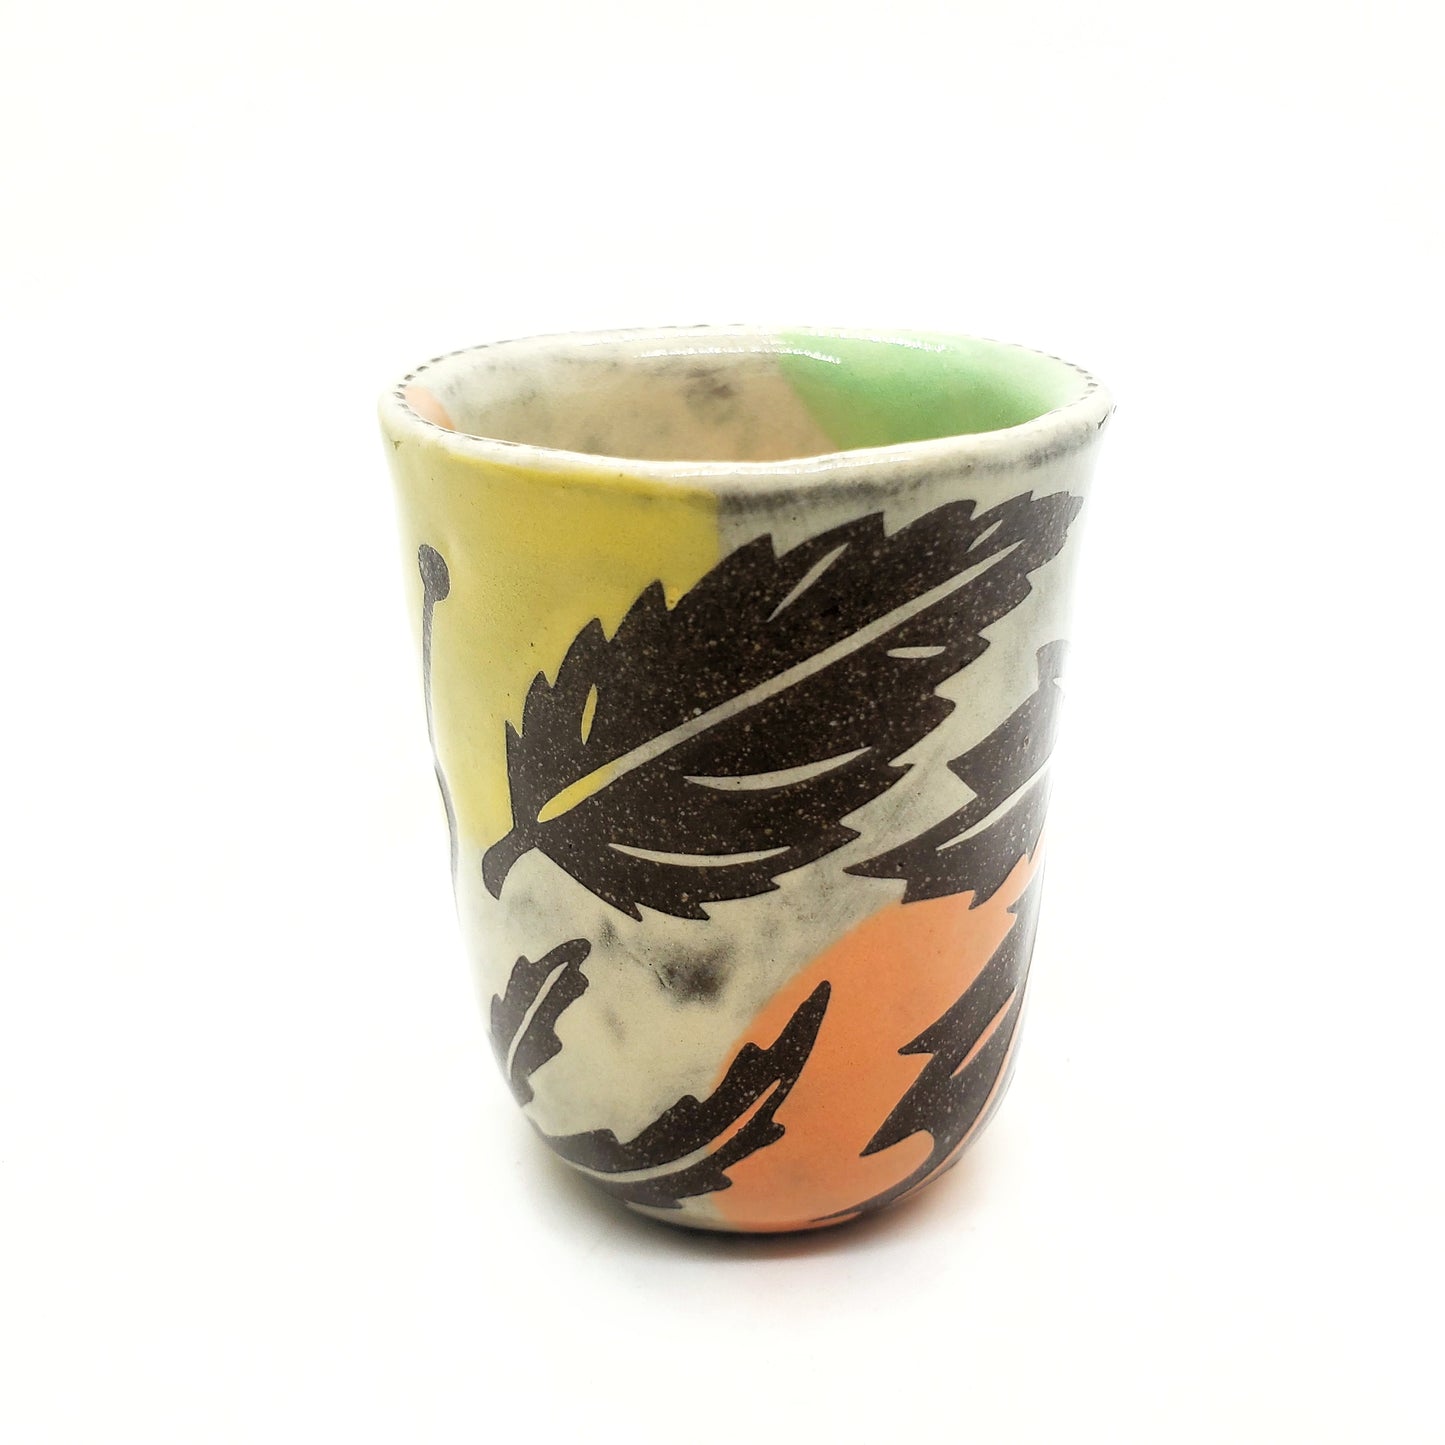 Mini cup - snail and leaves 1 (2 oz)